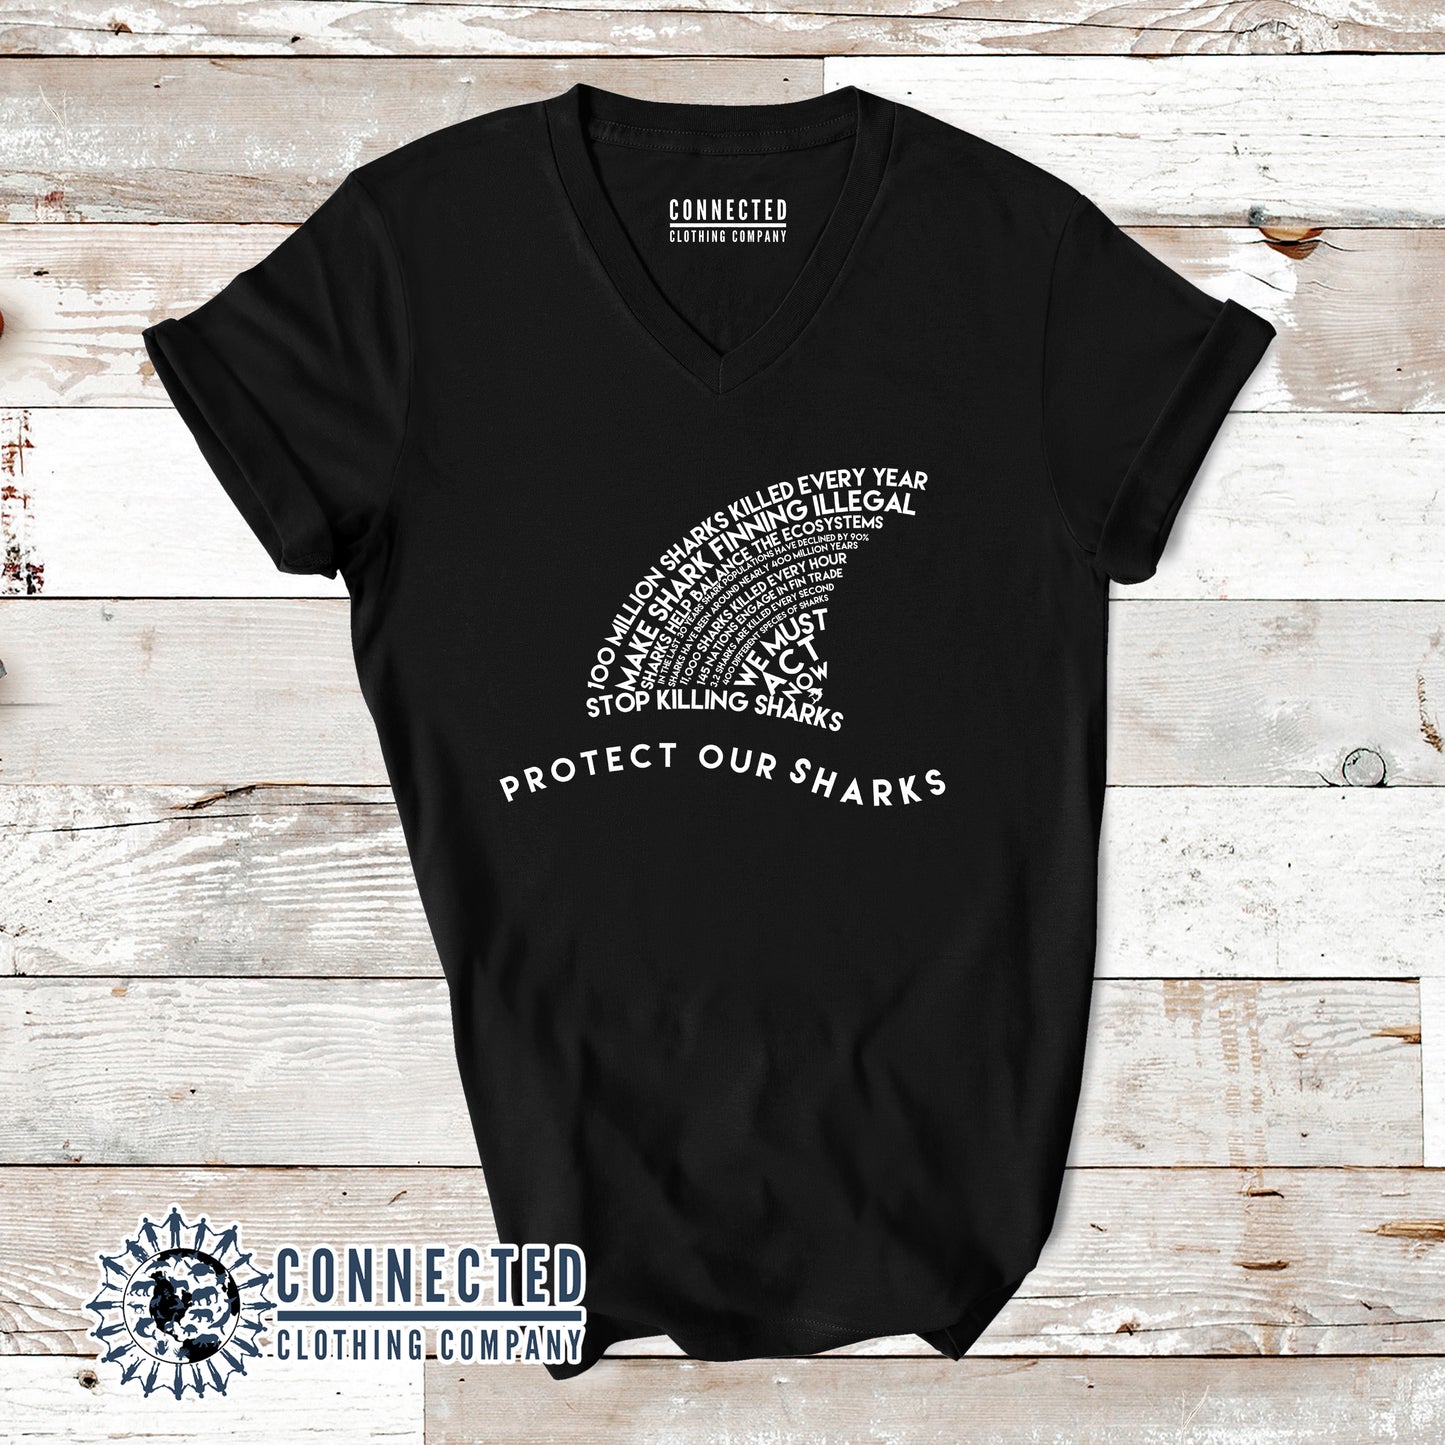 Black Protect Our Sharks Short-Sleeve Women's V-Neck Tee - sweetsherriloudesigns - Ethically and Sustainably Made - 10% of profits donated to shark conservation